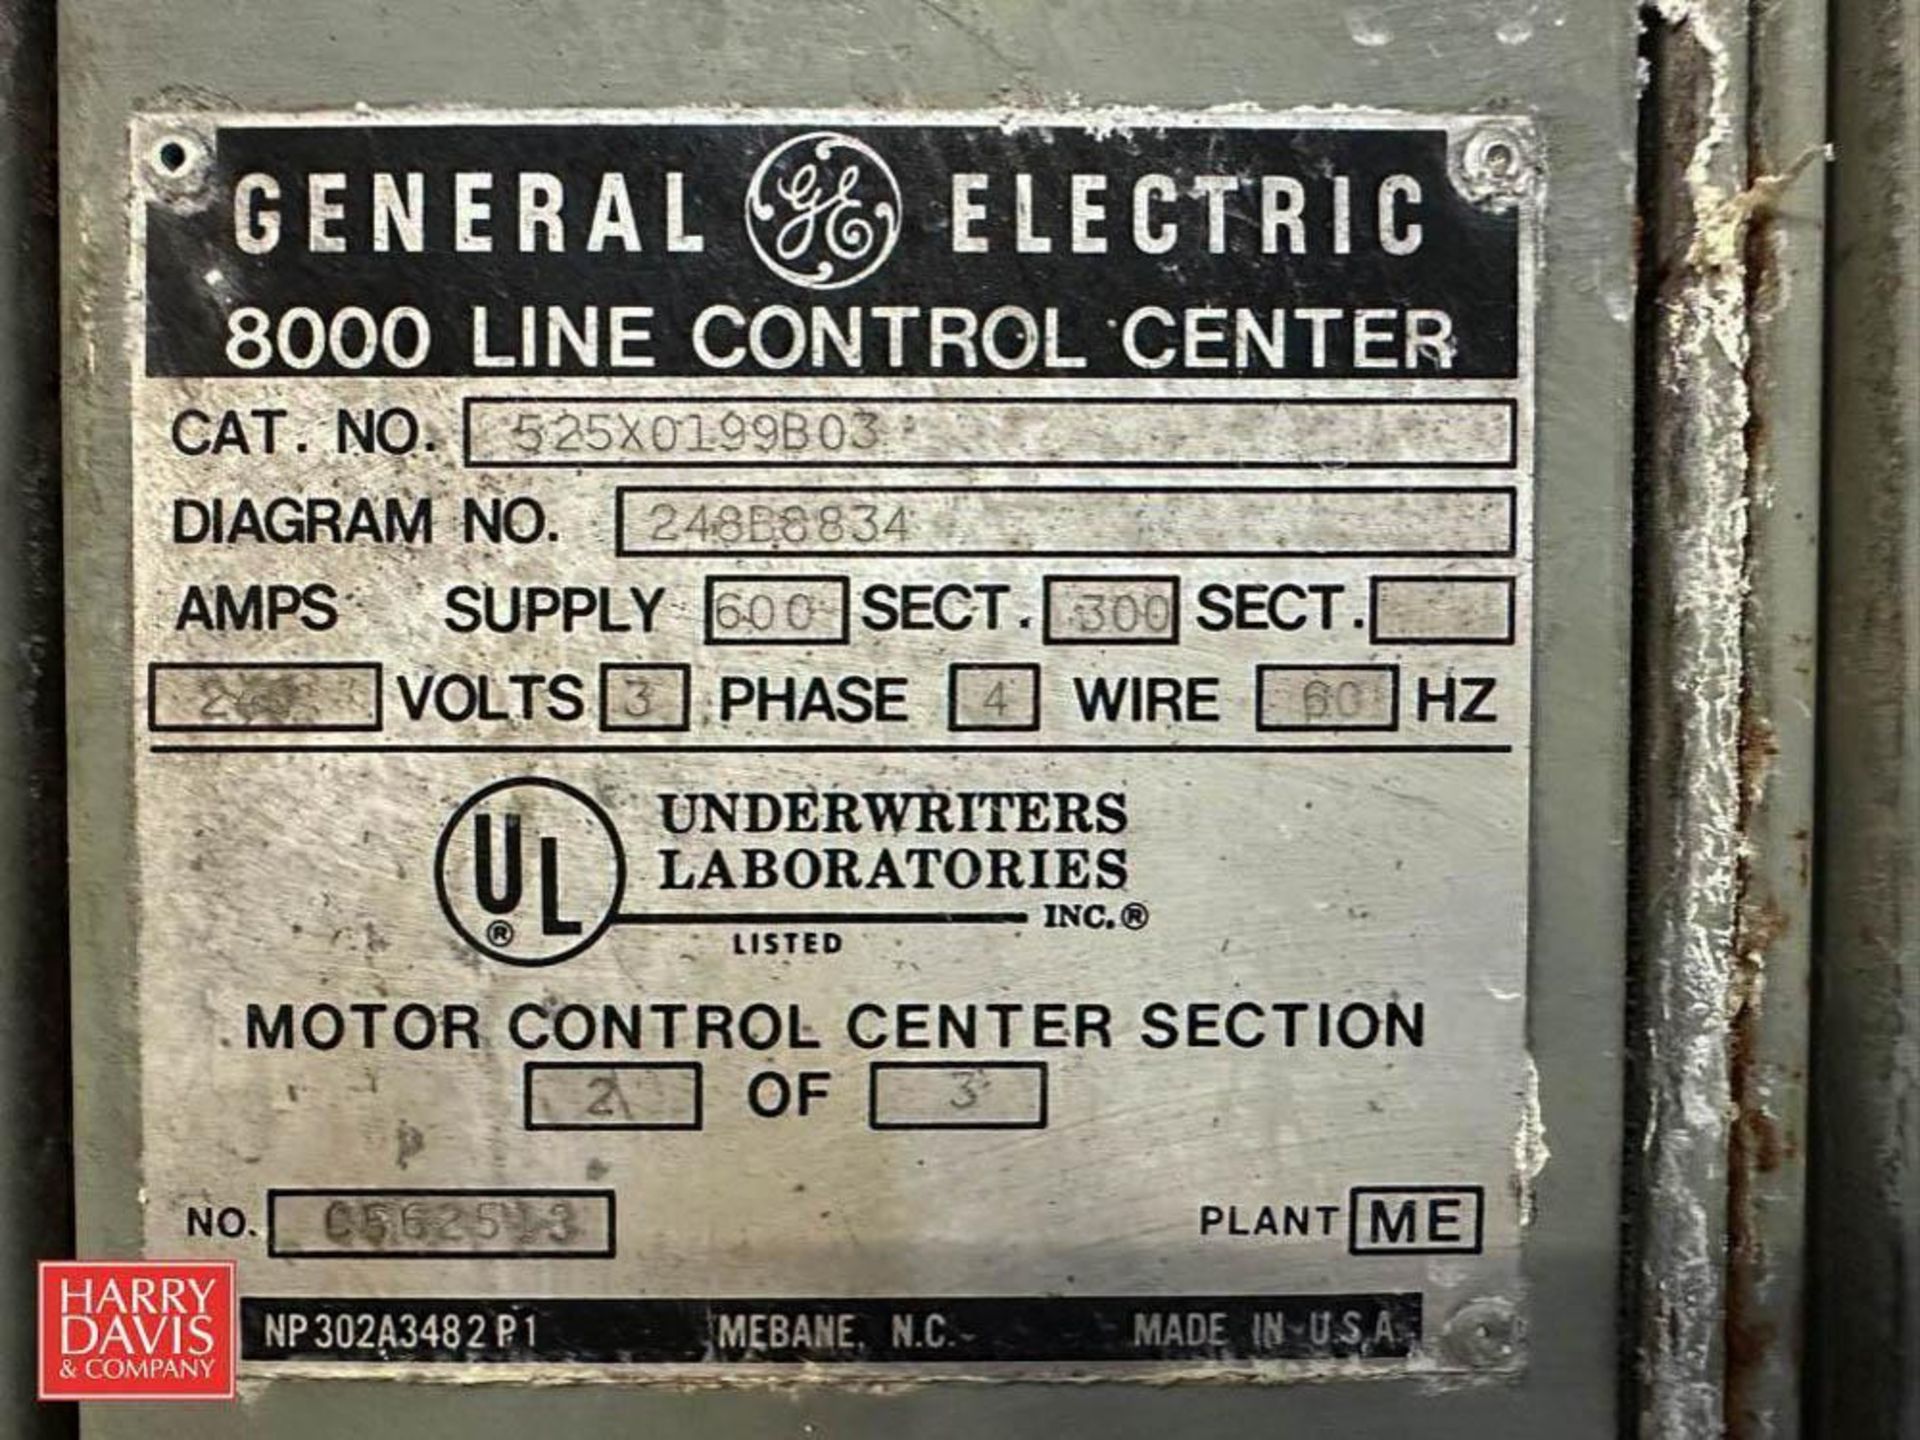 GE 8000 600/300 Amp Motor Control Center, S/N: 525X0199B03 with (12) Disconnects - Image 2 of 2